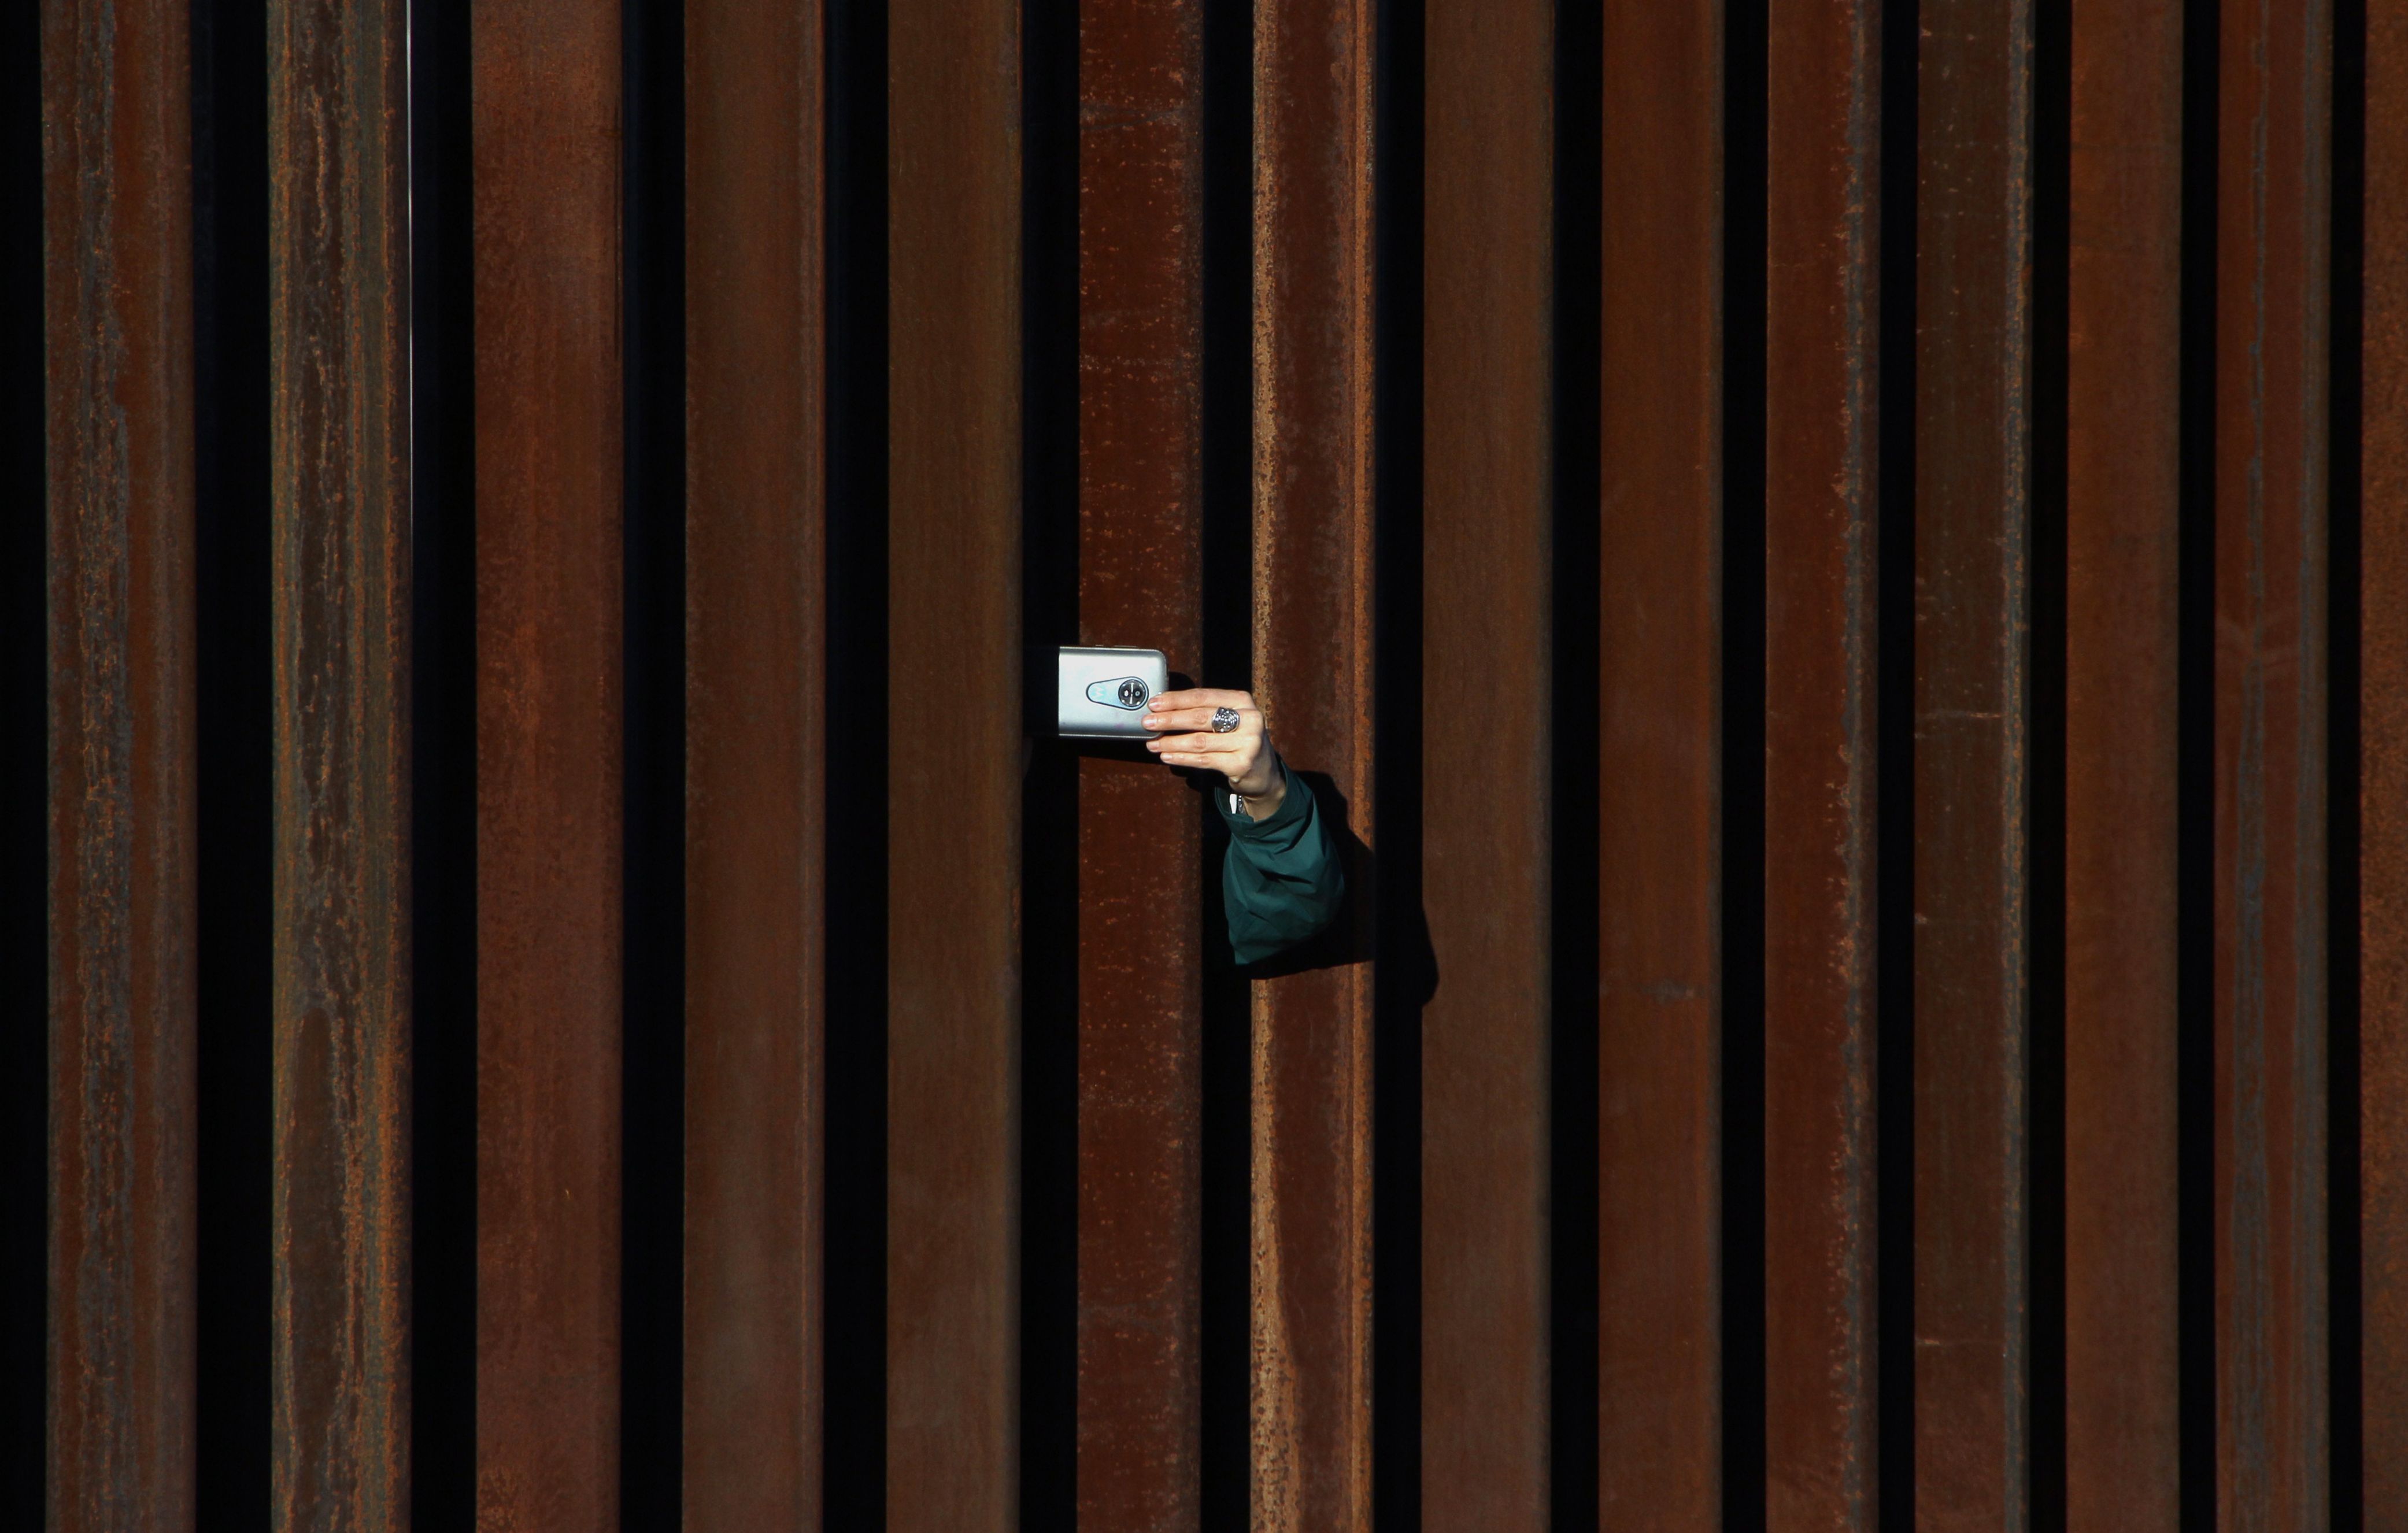 A woman in the United States takes a picture to Mexico through the border fence as residents of Anapra, a neighbourhood on the outskirts of Ciudad Juarez in Mexico, and other people attend a prayer with priests and bishops from both countries to ask for the migrants and people of the area, on February 26, 2019. - Built two years ago, the Anapra fence is one of several reinforced border barriers that the administration of US President Donald Trump calls the first sections of the wall. (HERIKA MARTINEZ/AFP via Getty Images)